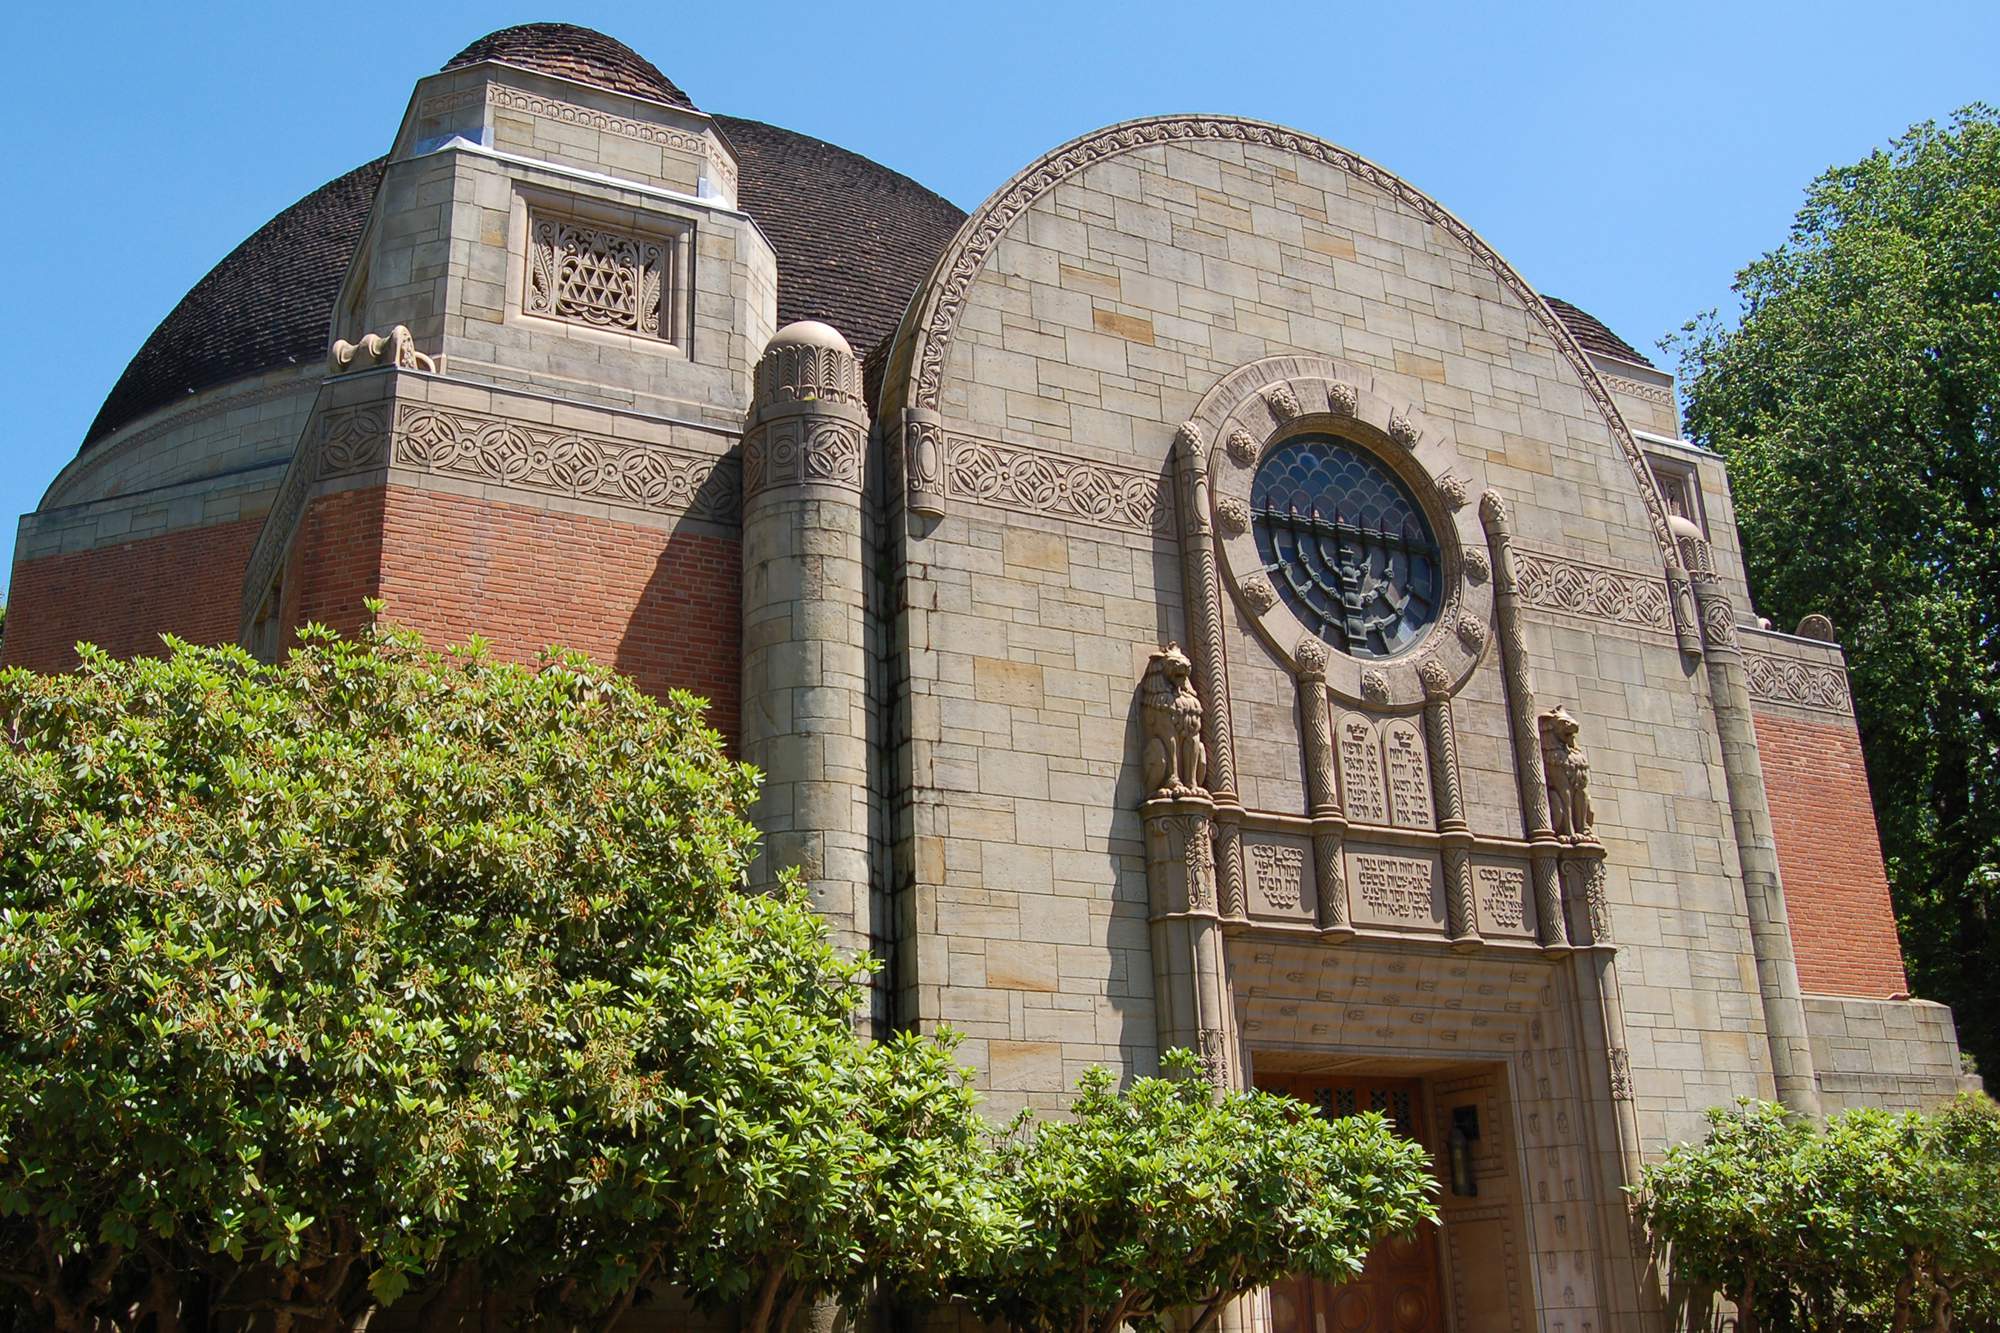 Read Congregation Beth Israel’s Clergy Statement of Principles